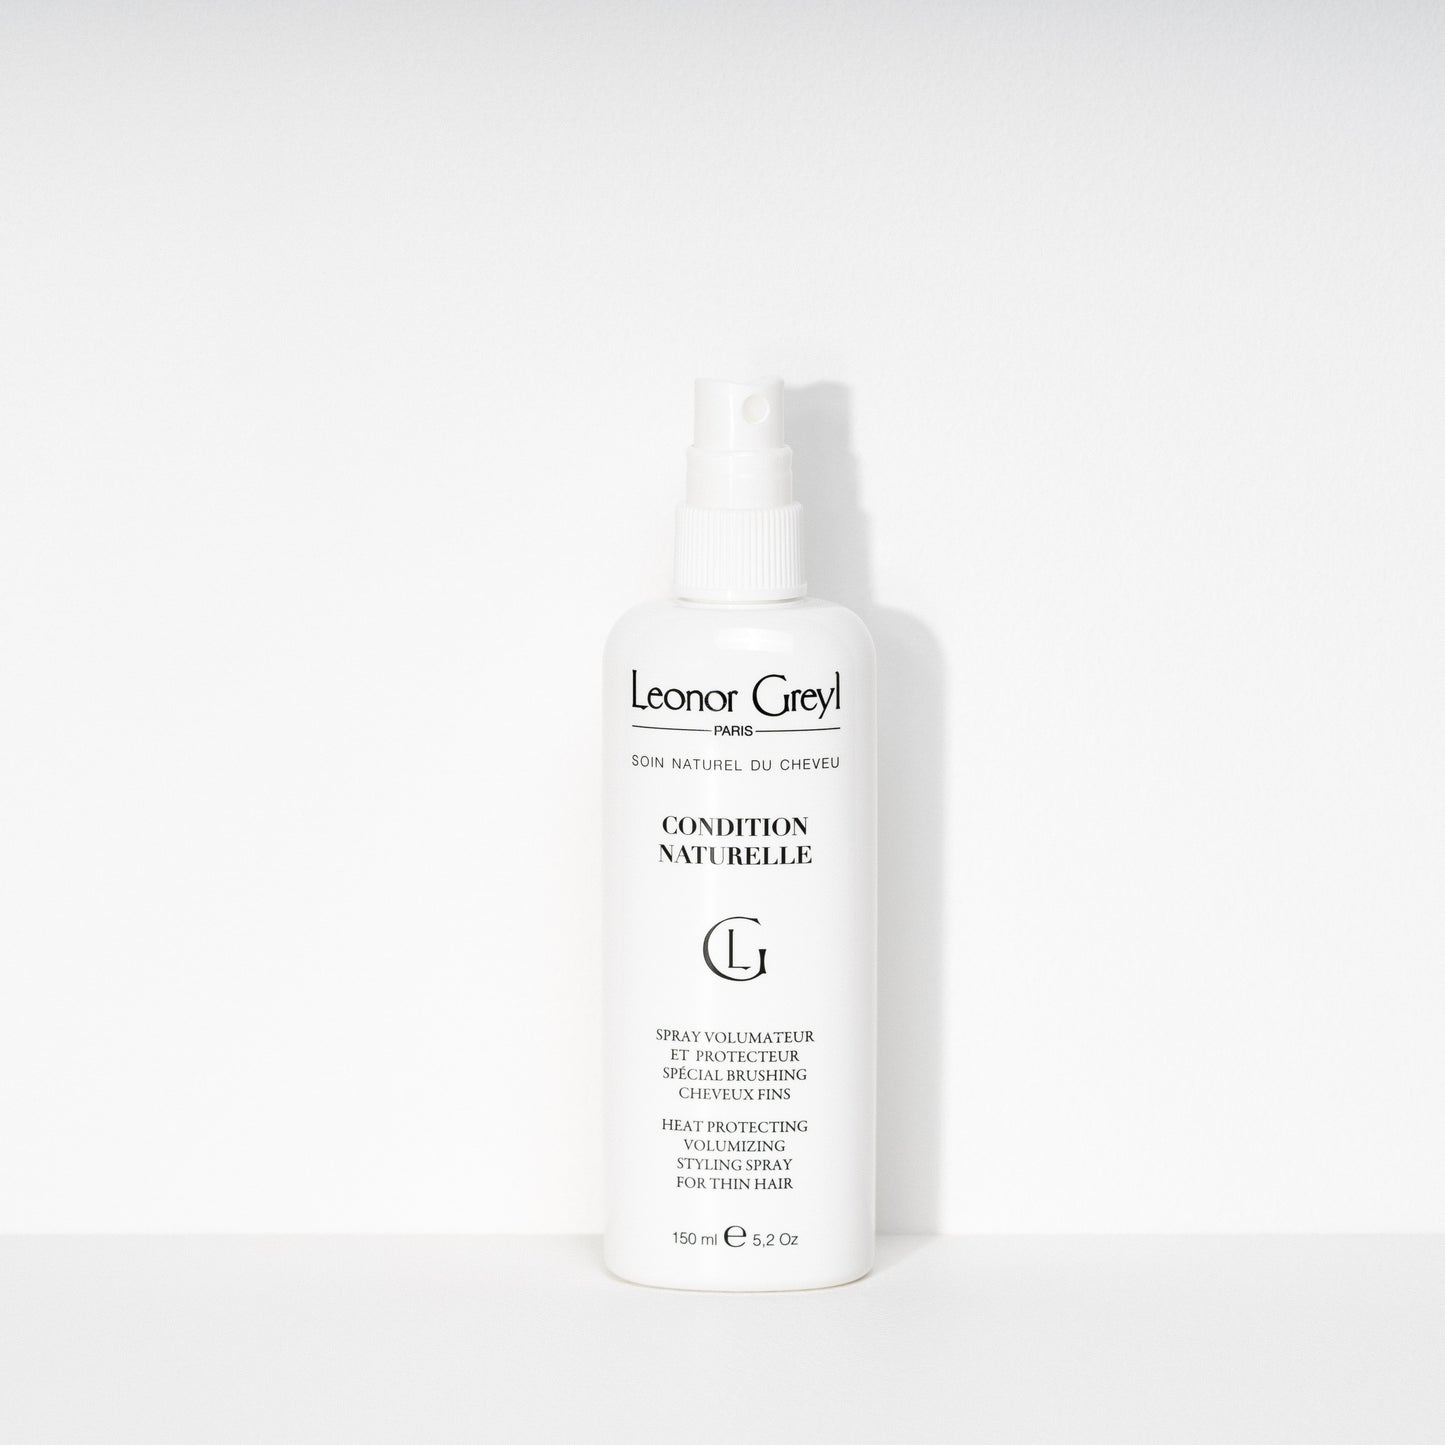 LEONOR GREYL HAIR CARE HAIR STYLING PRODUCTS Condition Naturelle